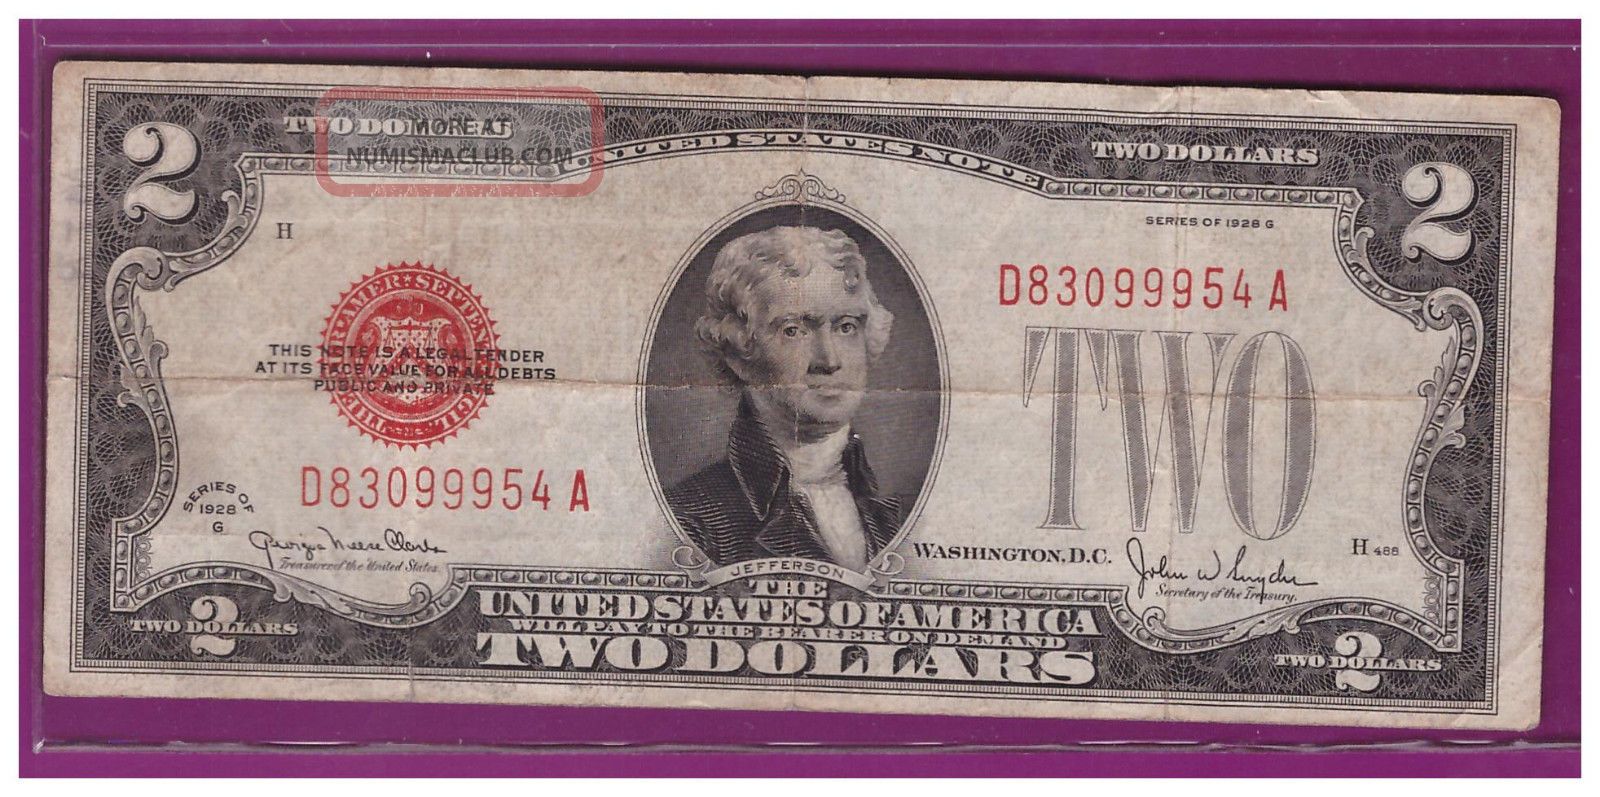 1928g $2 Dollar Bill Old Us Note Legal Tender Paper Money Currency Red Seal V160 Small Size Notes photo